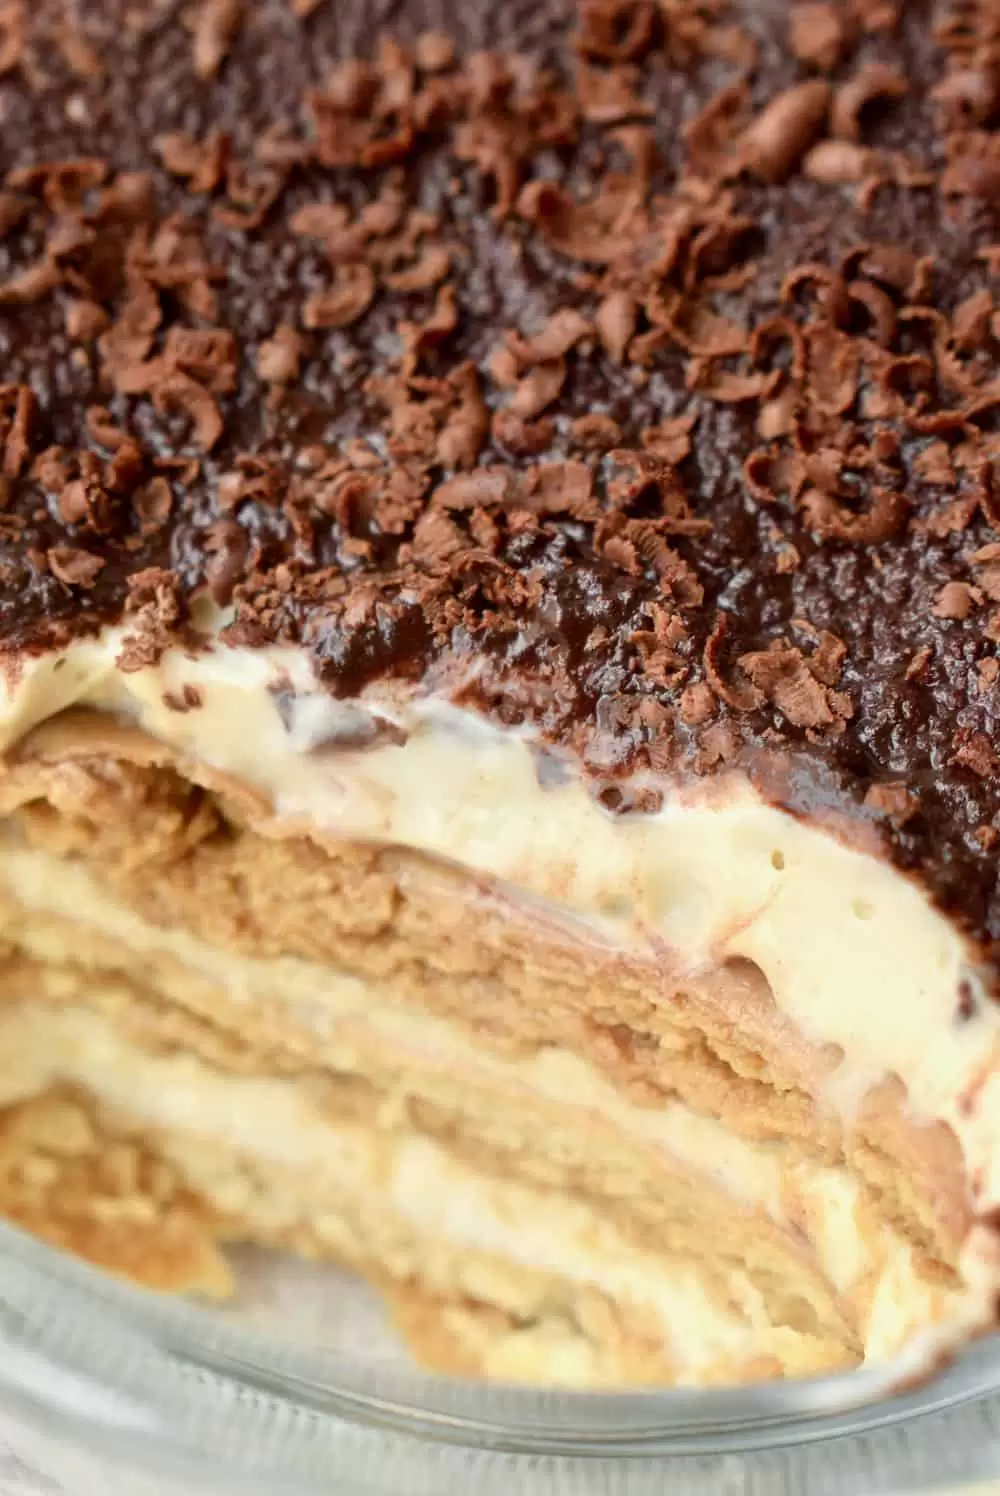 A close up shows the rich creamy layer, the coffee soaked biscuits and dark chocolate topping